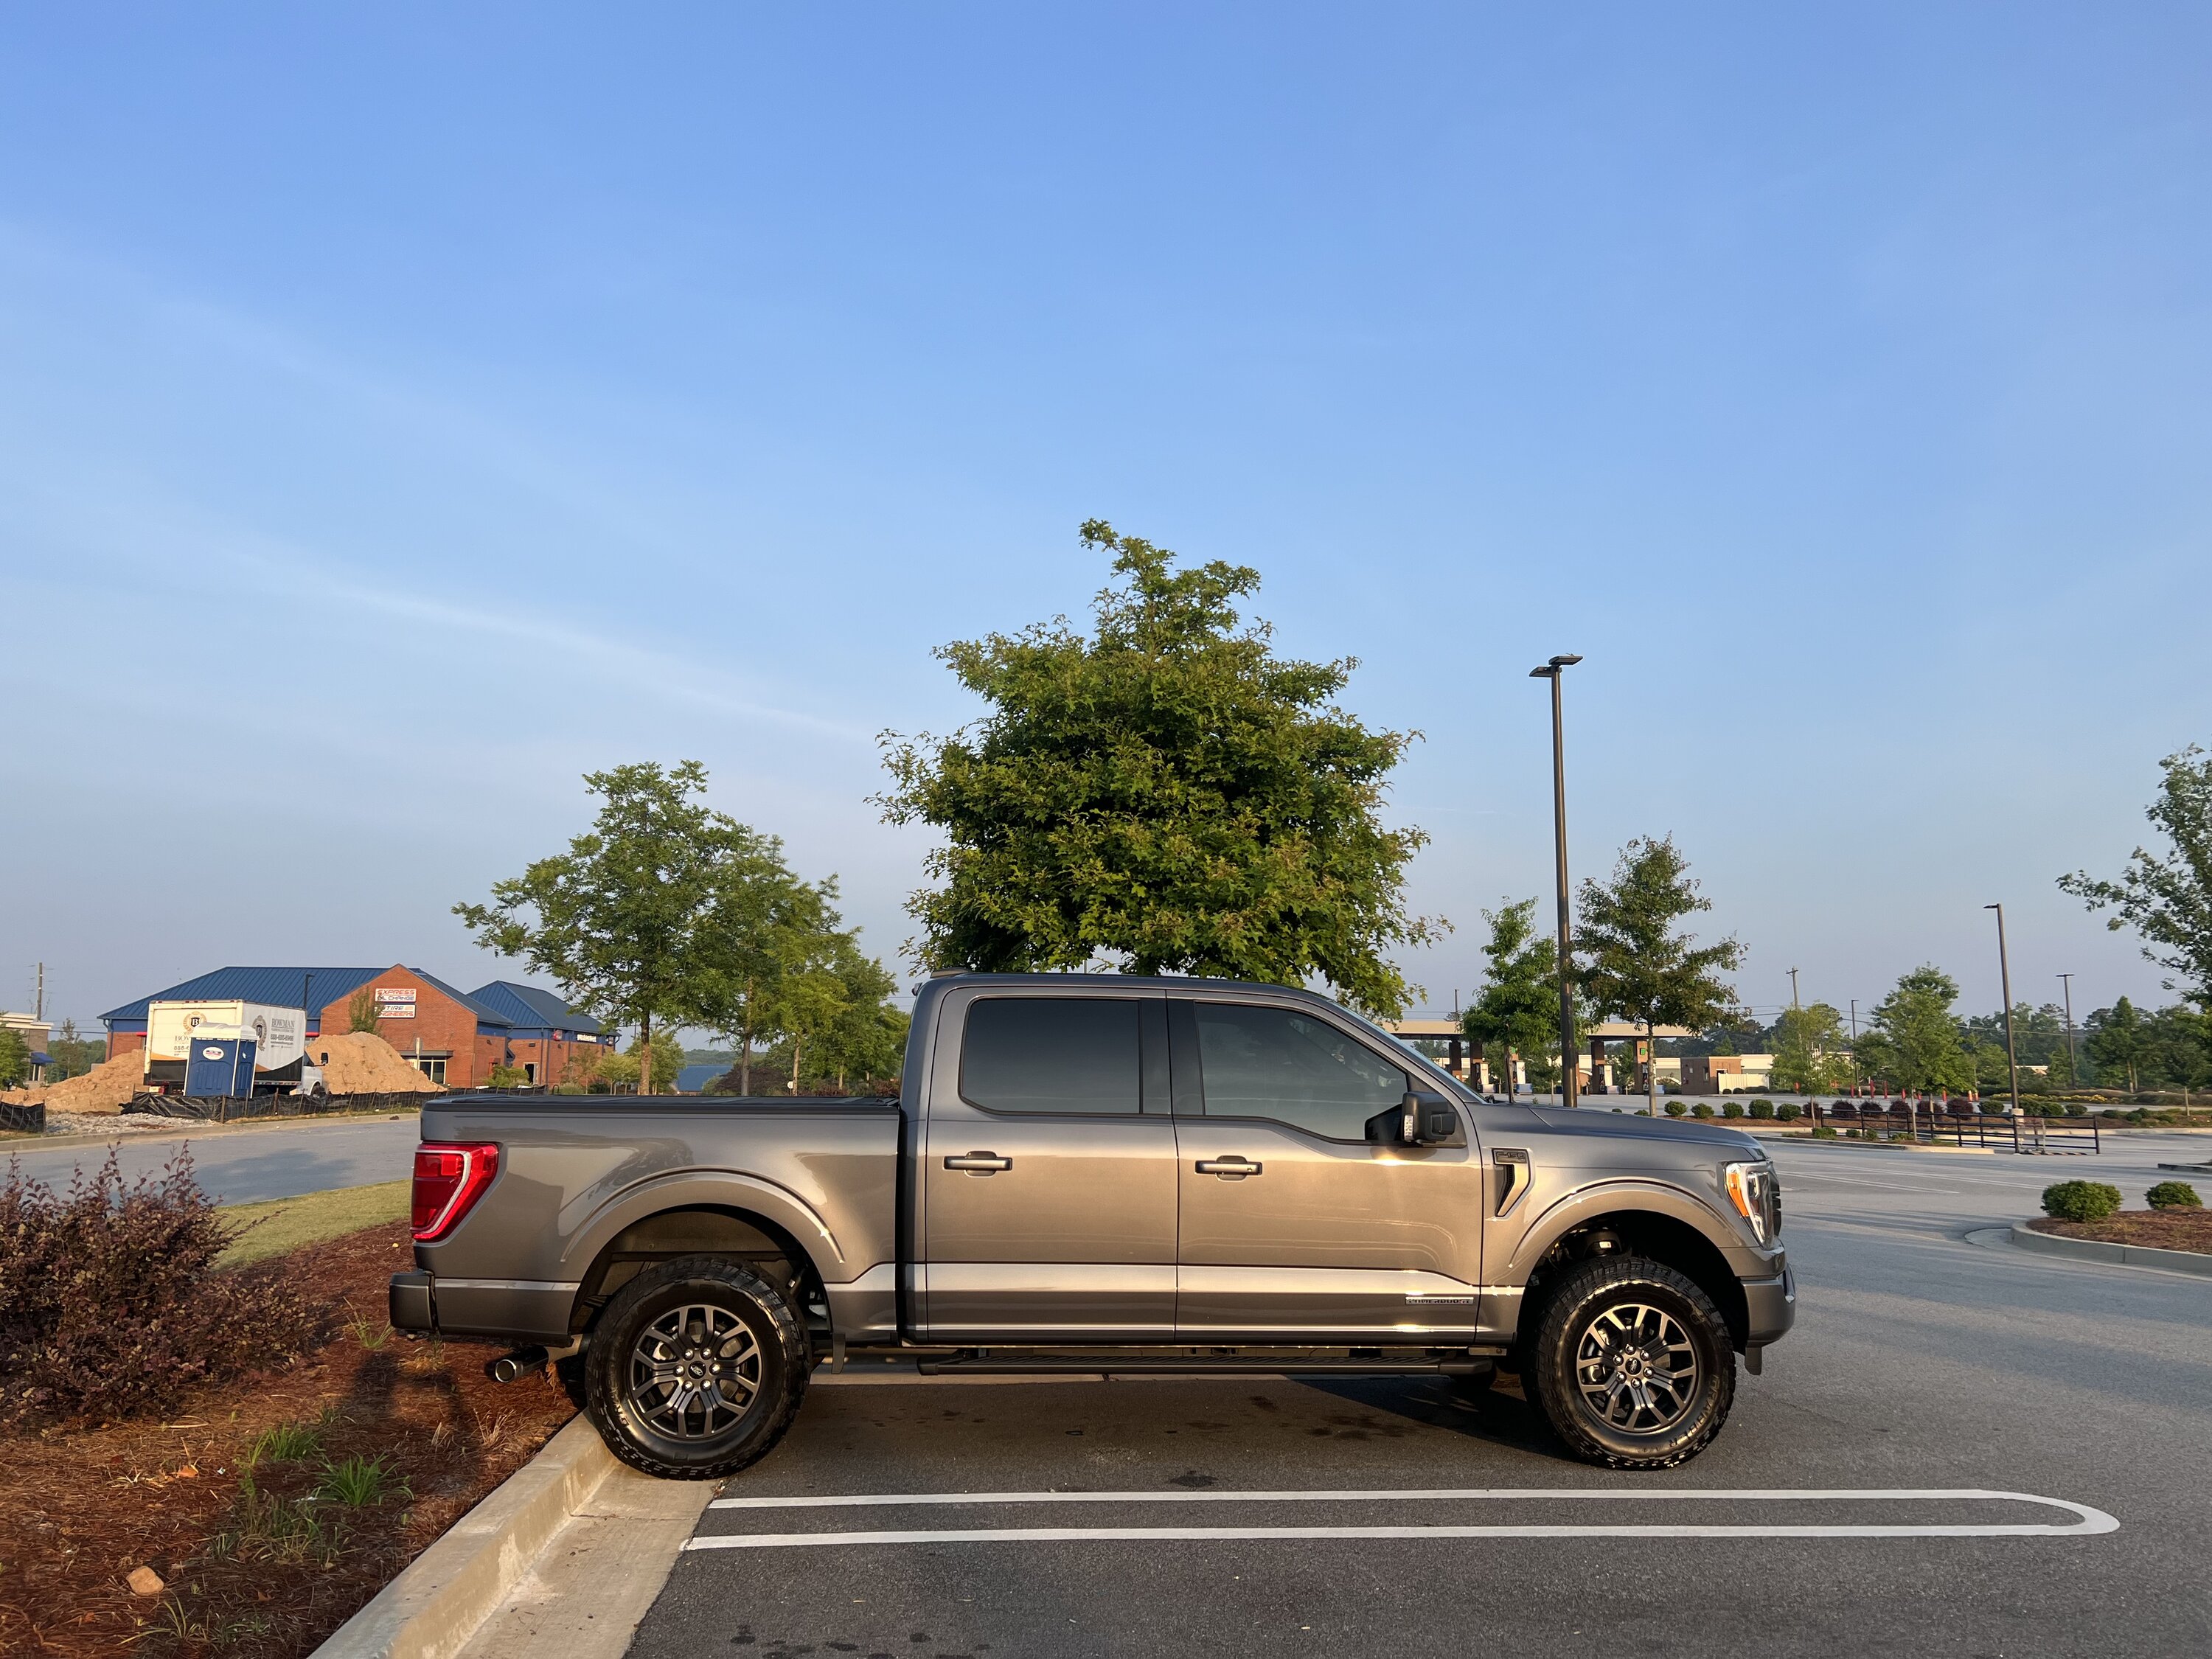 Ford F-150 Rough Country 3" inch lift kit - review / feedback? IMG_7661